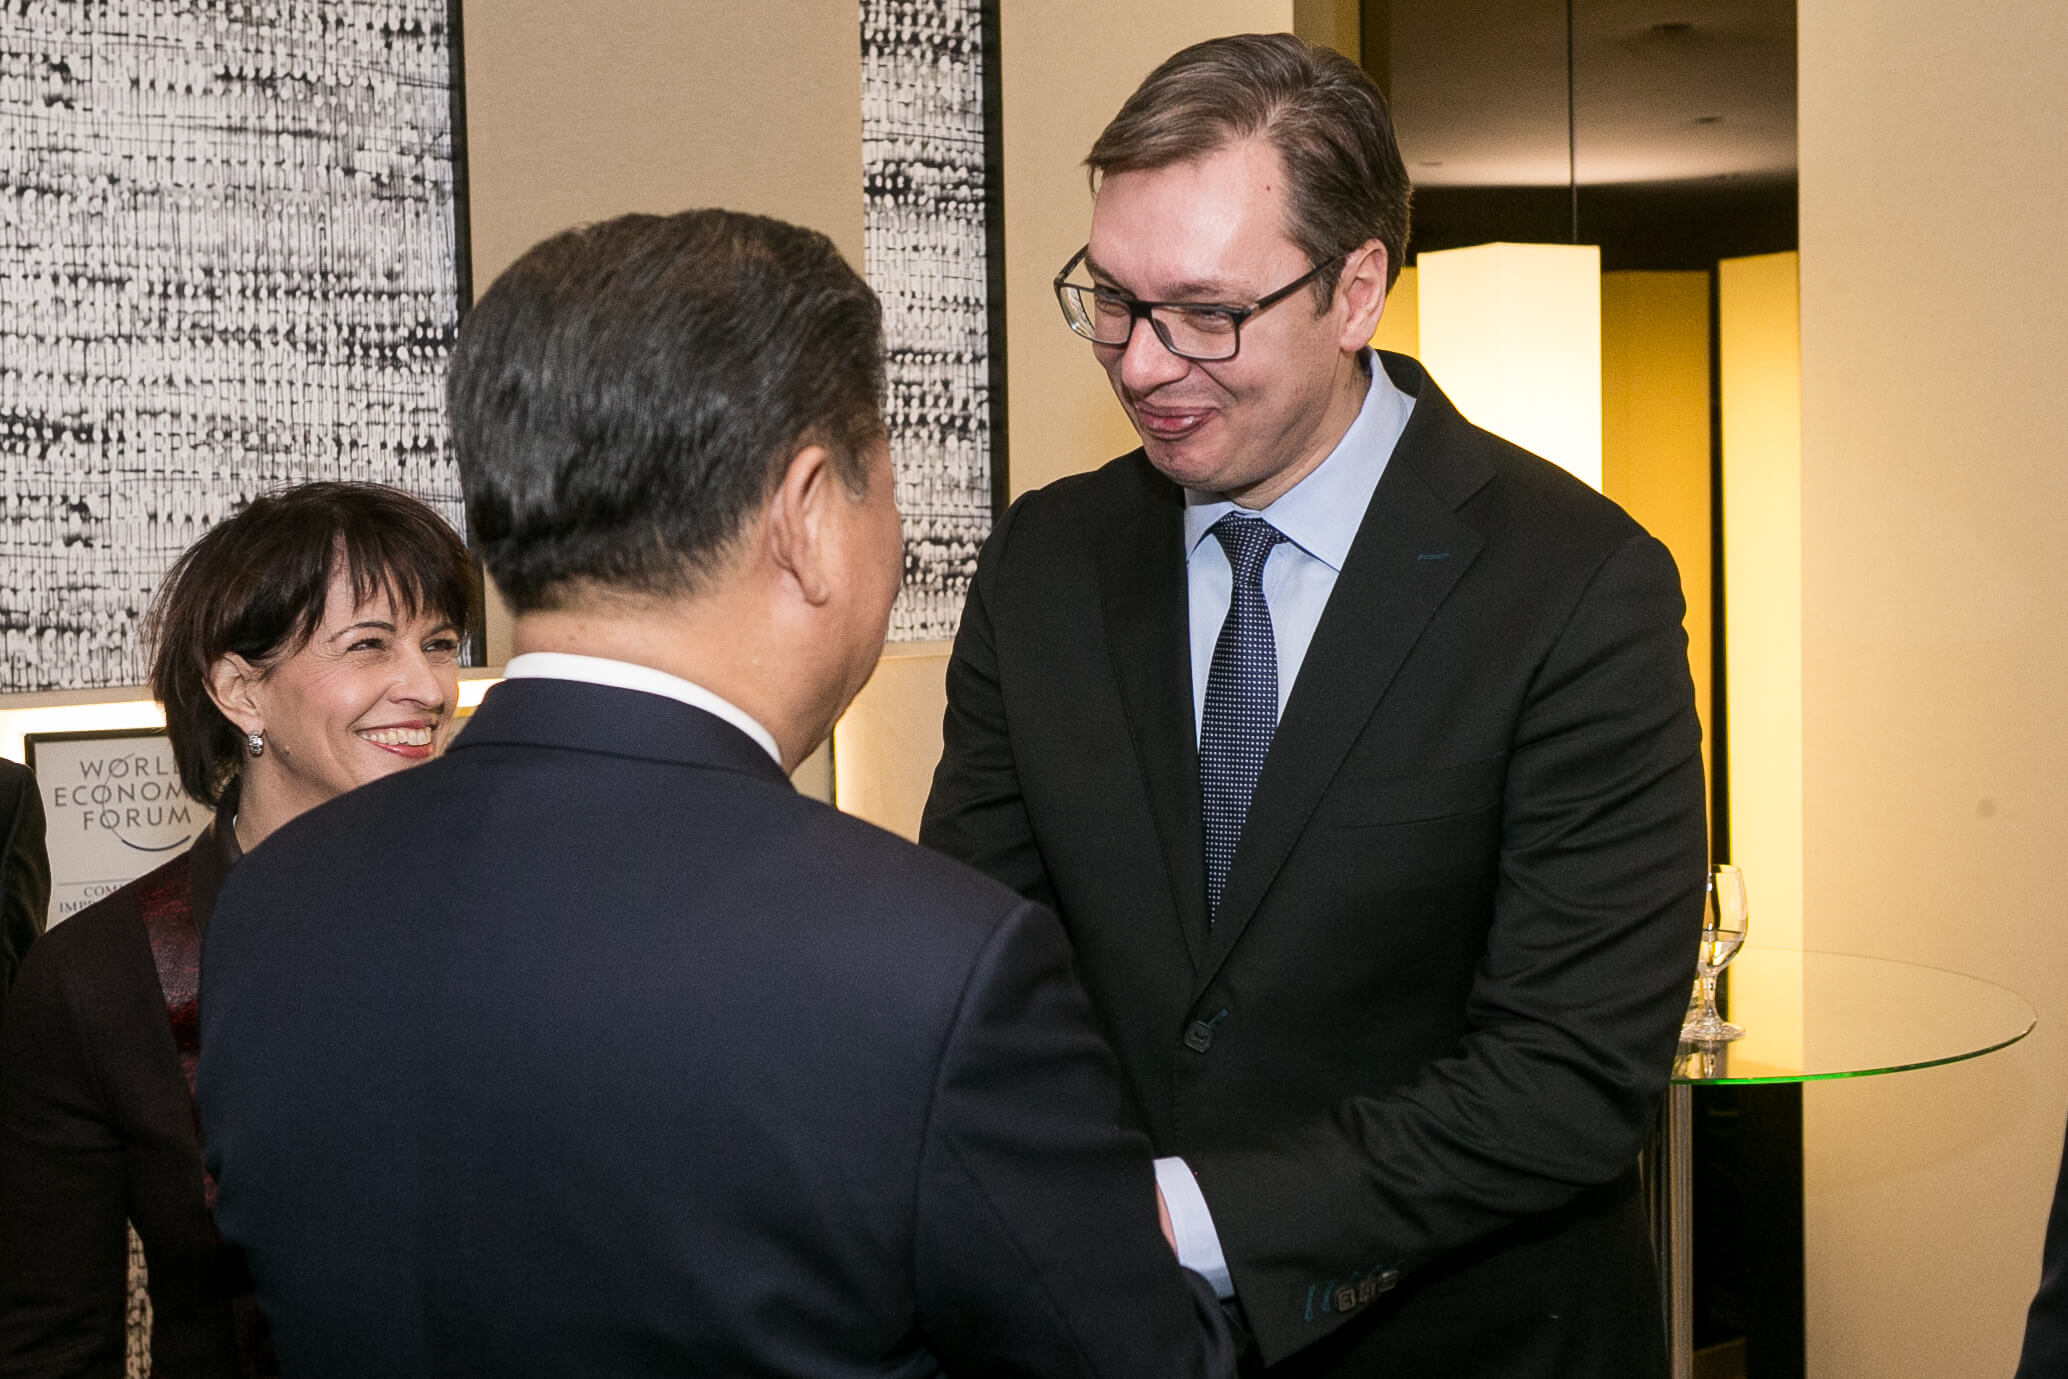 Bandovic-Xi Jinping greets Aleksandar Vucic at the Annual Meeting 2017 of the WEF in Davos, January 17, 2017-World Economic Forum, Benedikt von Loebell-Flickr